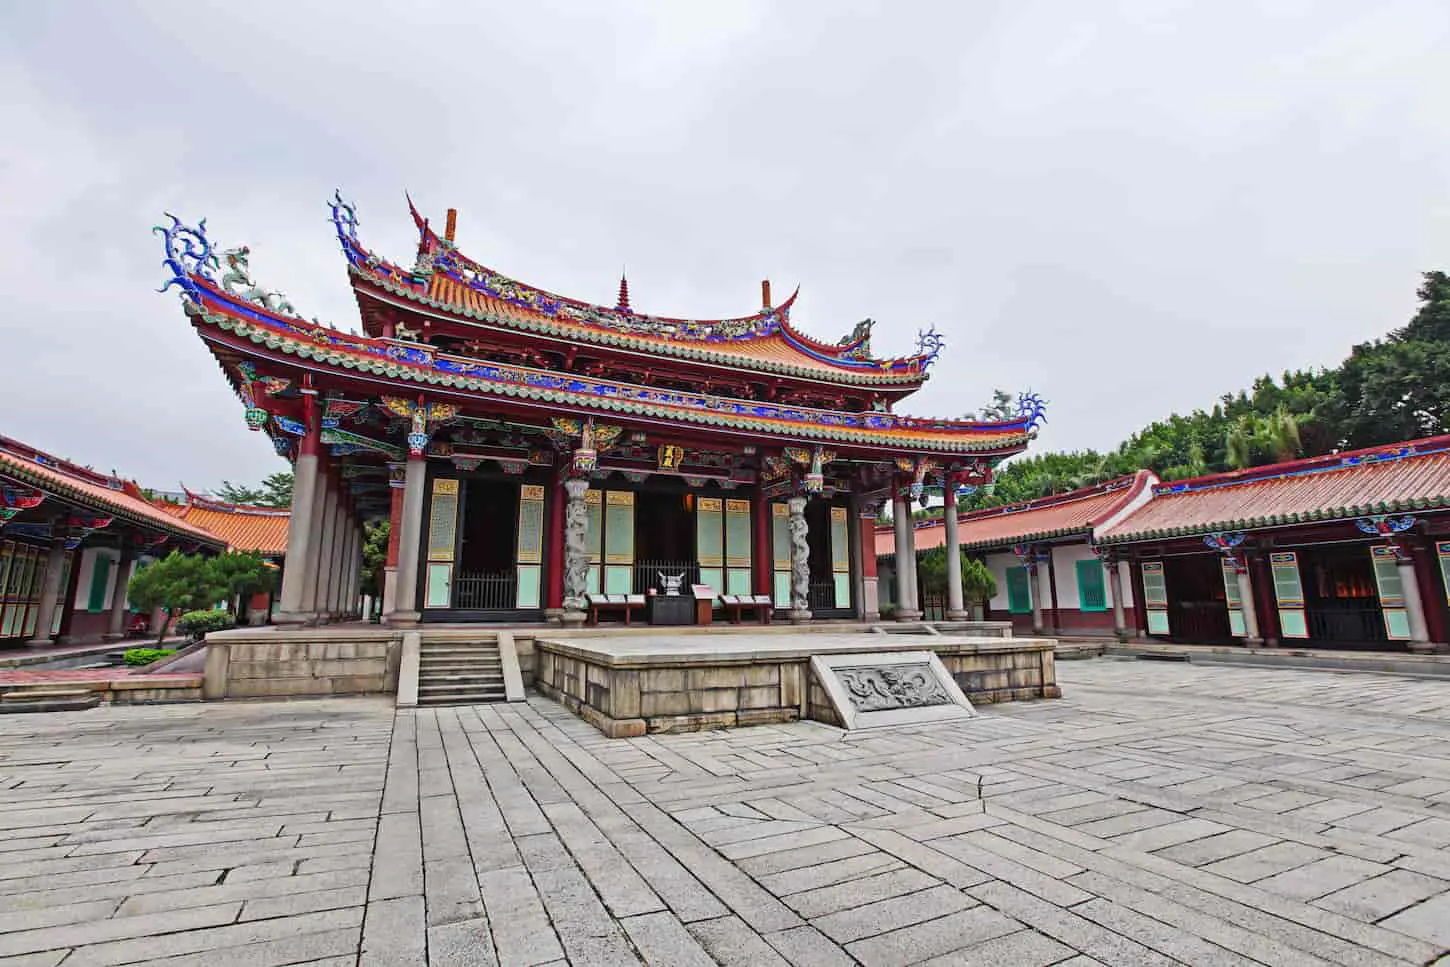 An image of Confucius Temple in Taiwan.